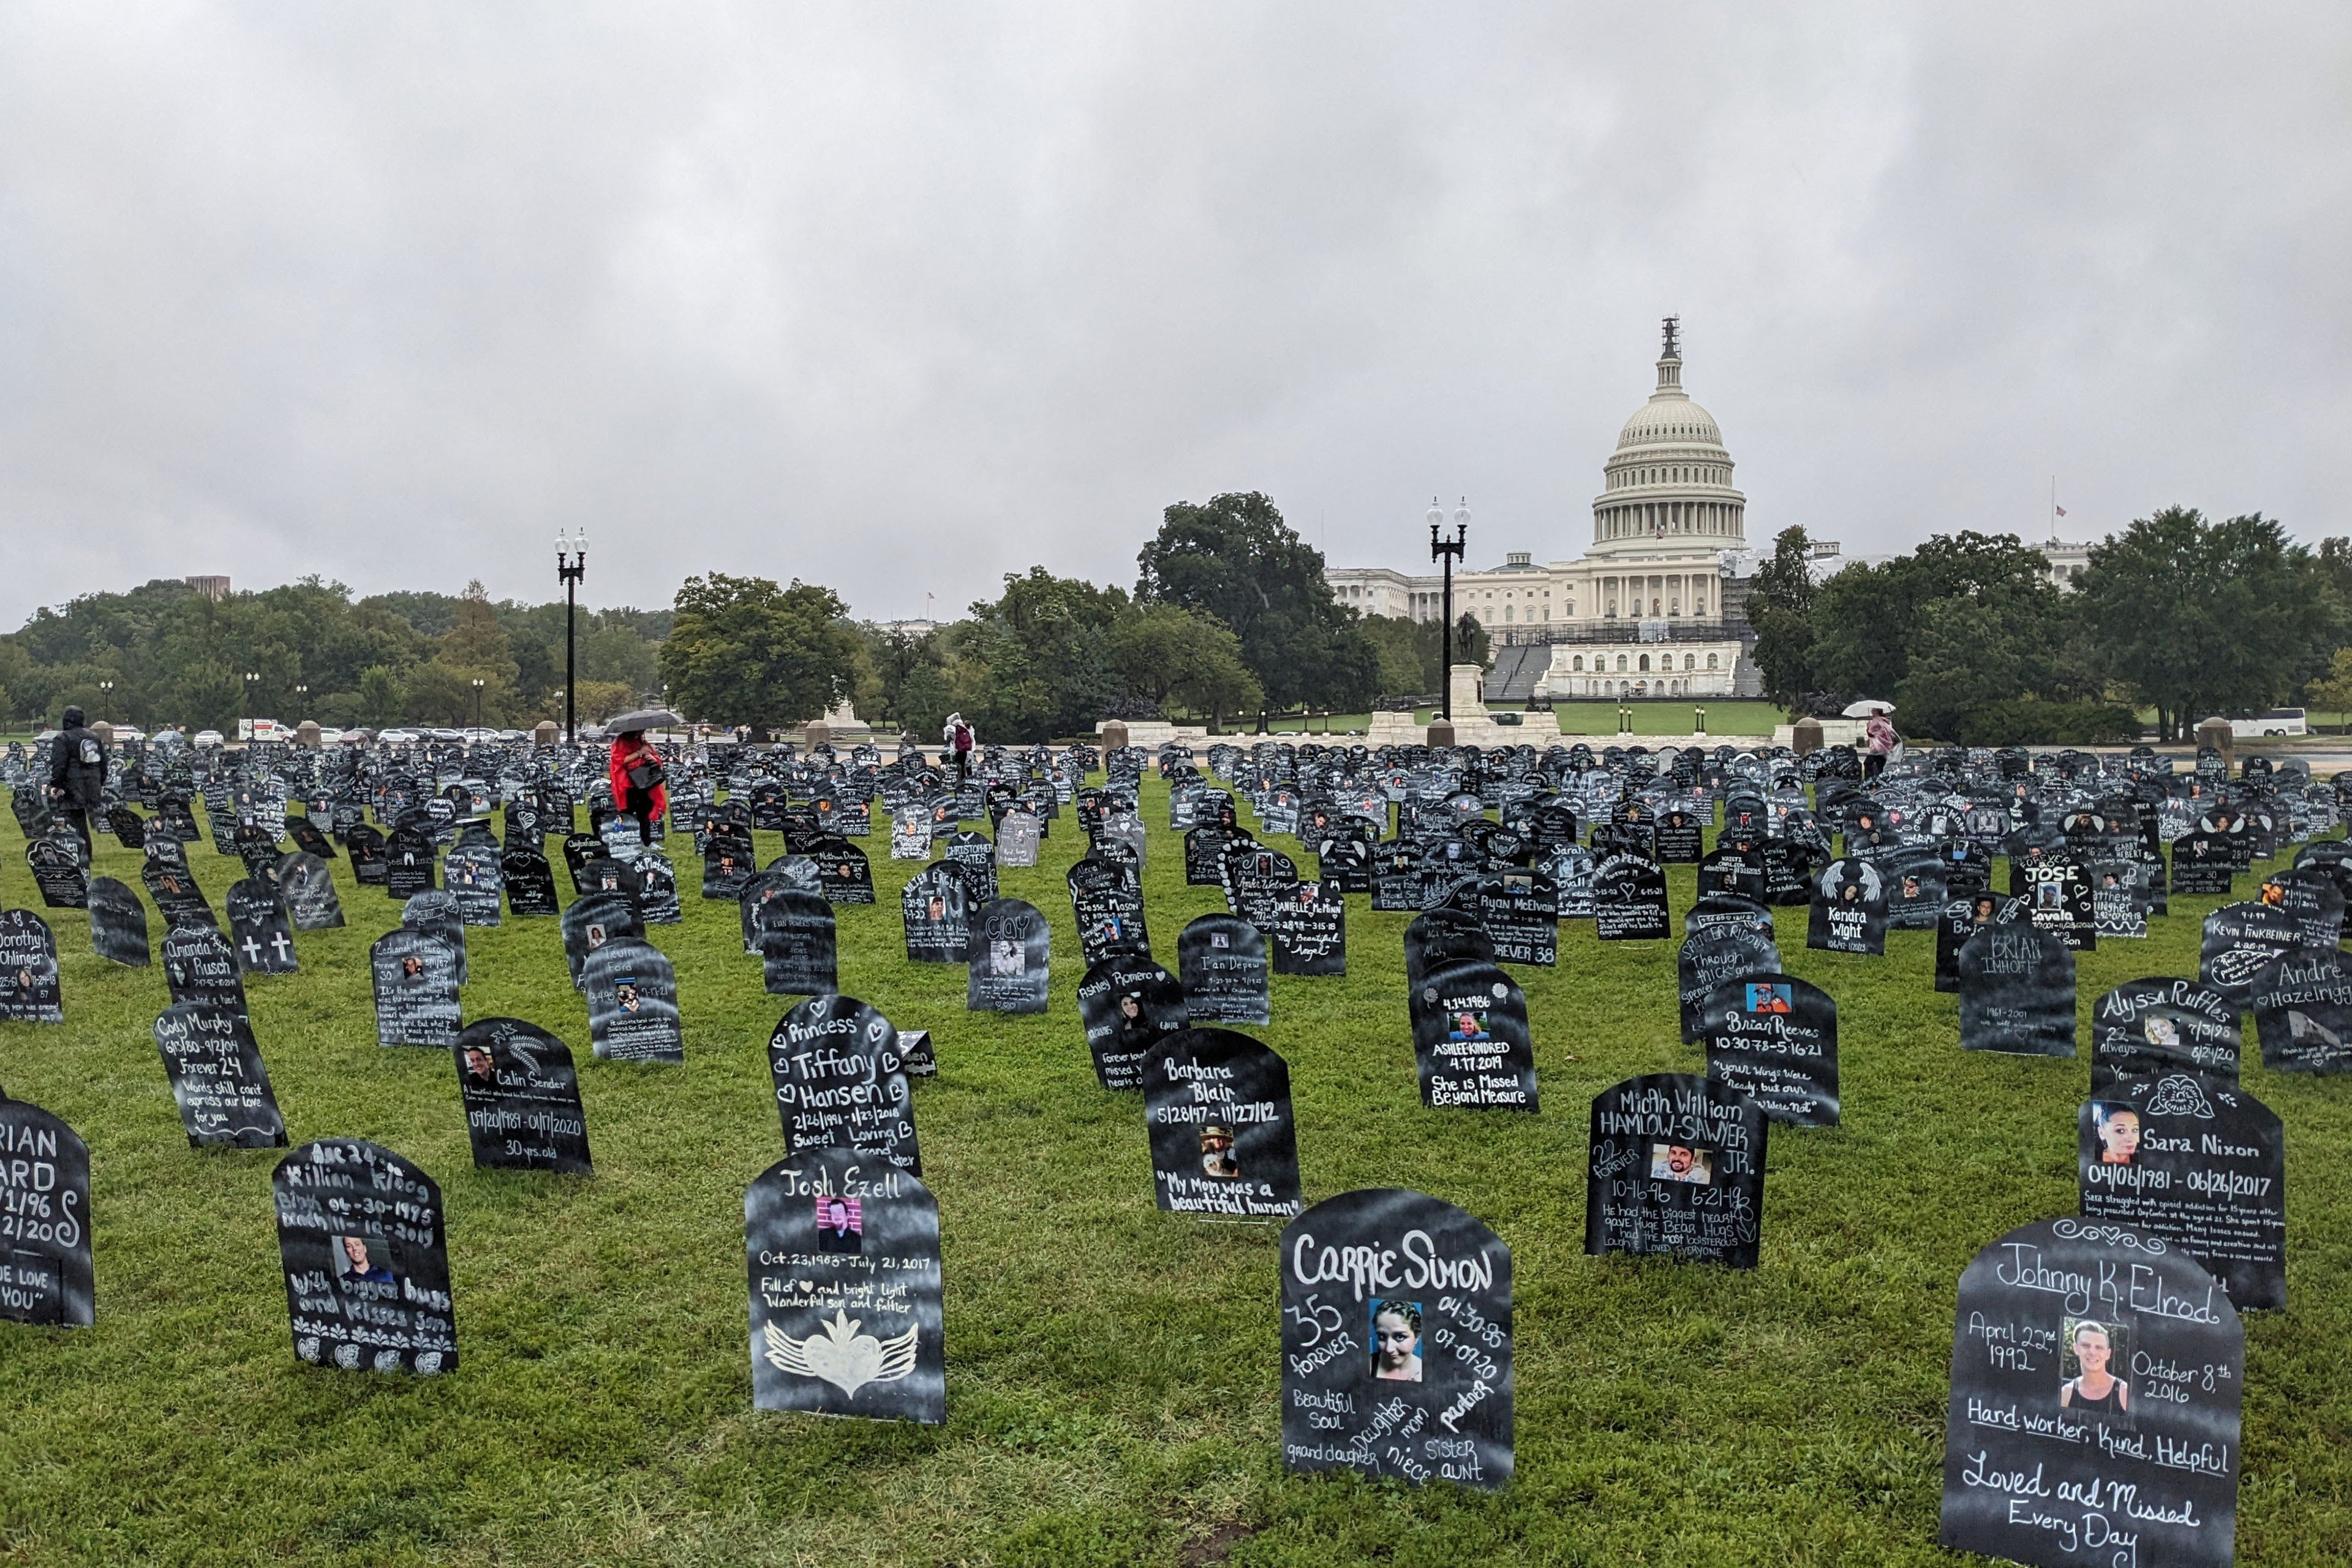 Hundreds of cardboard memorial markers in the shape of tombstones fill the lawn in front of the U.S. Capitol.